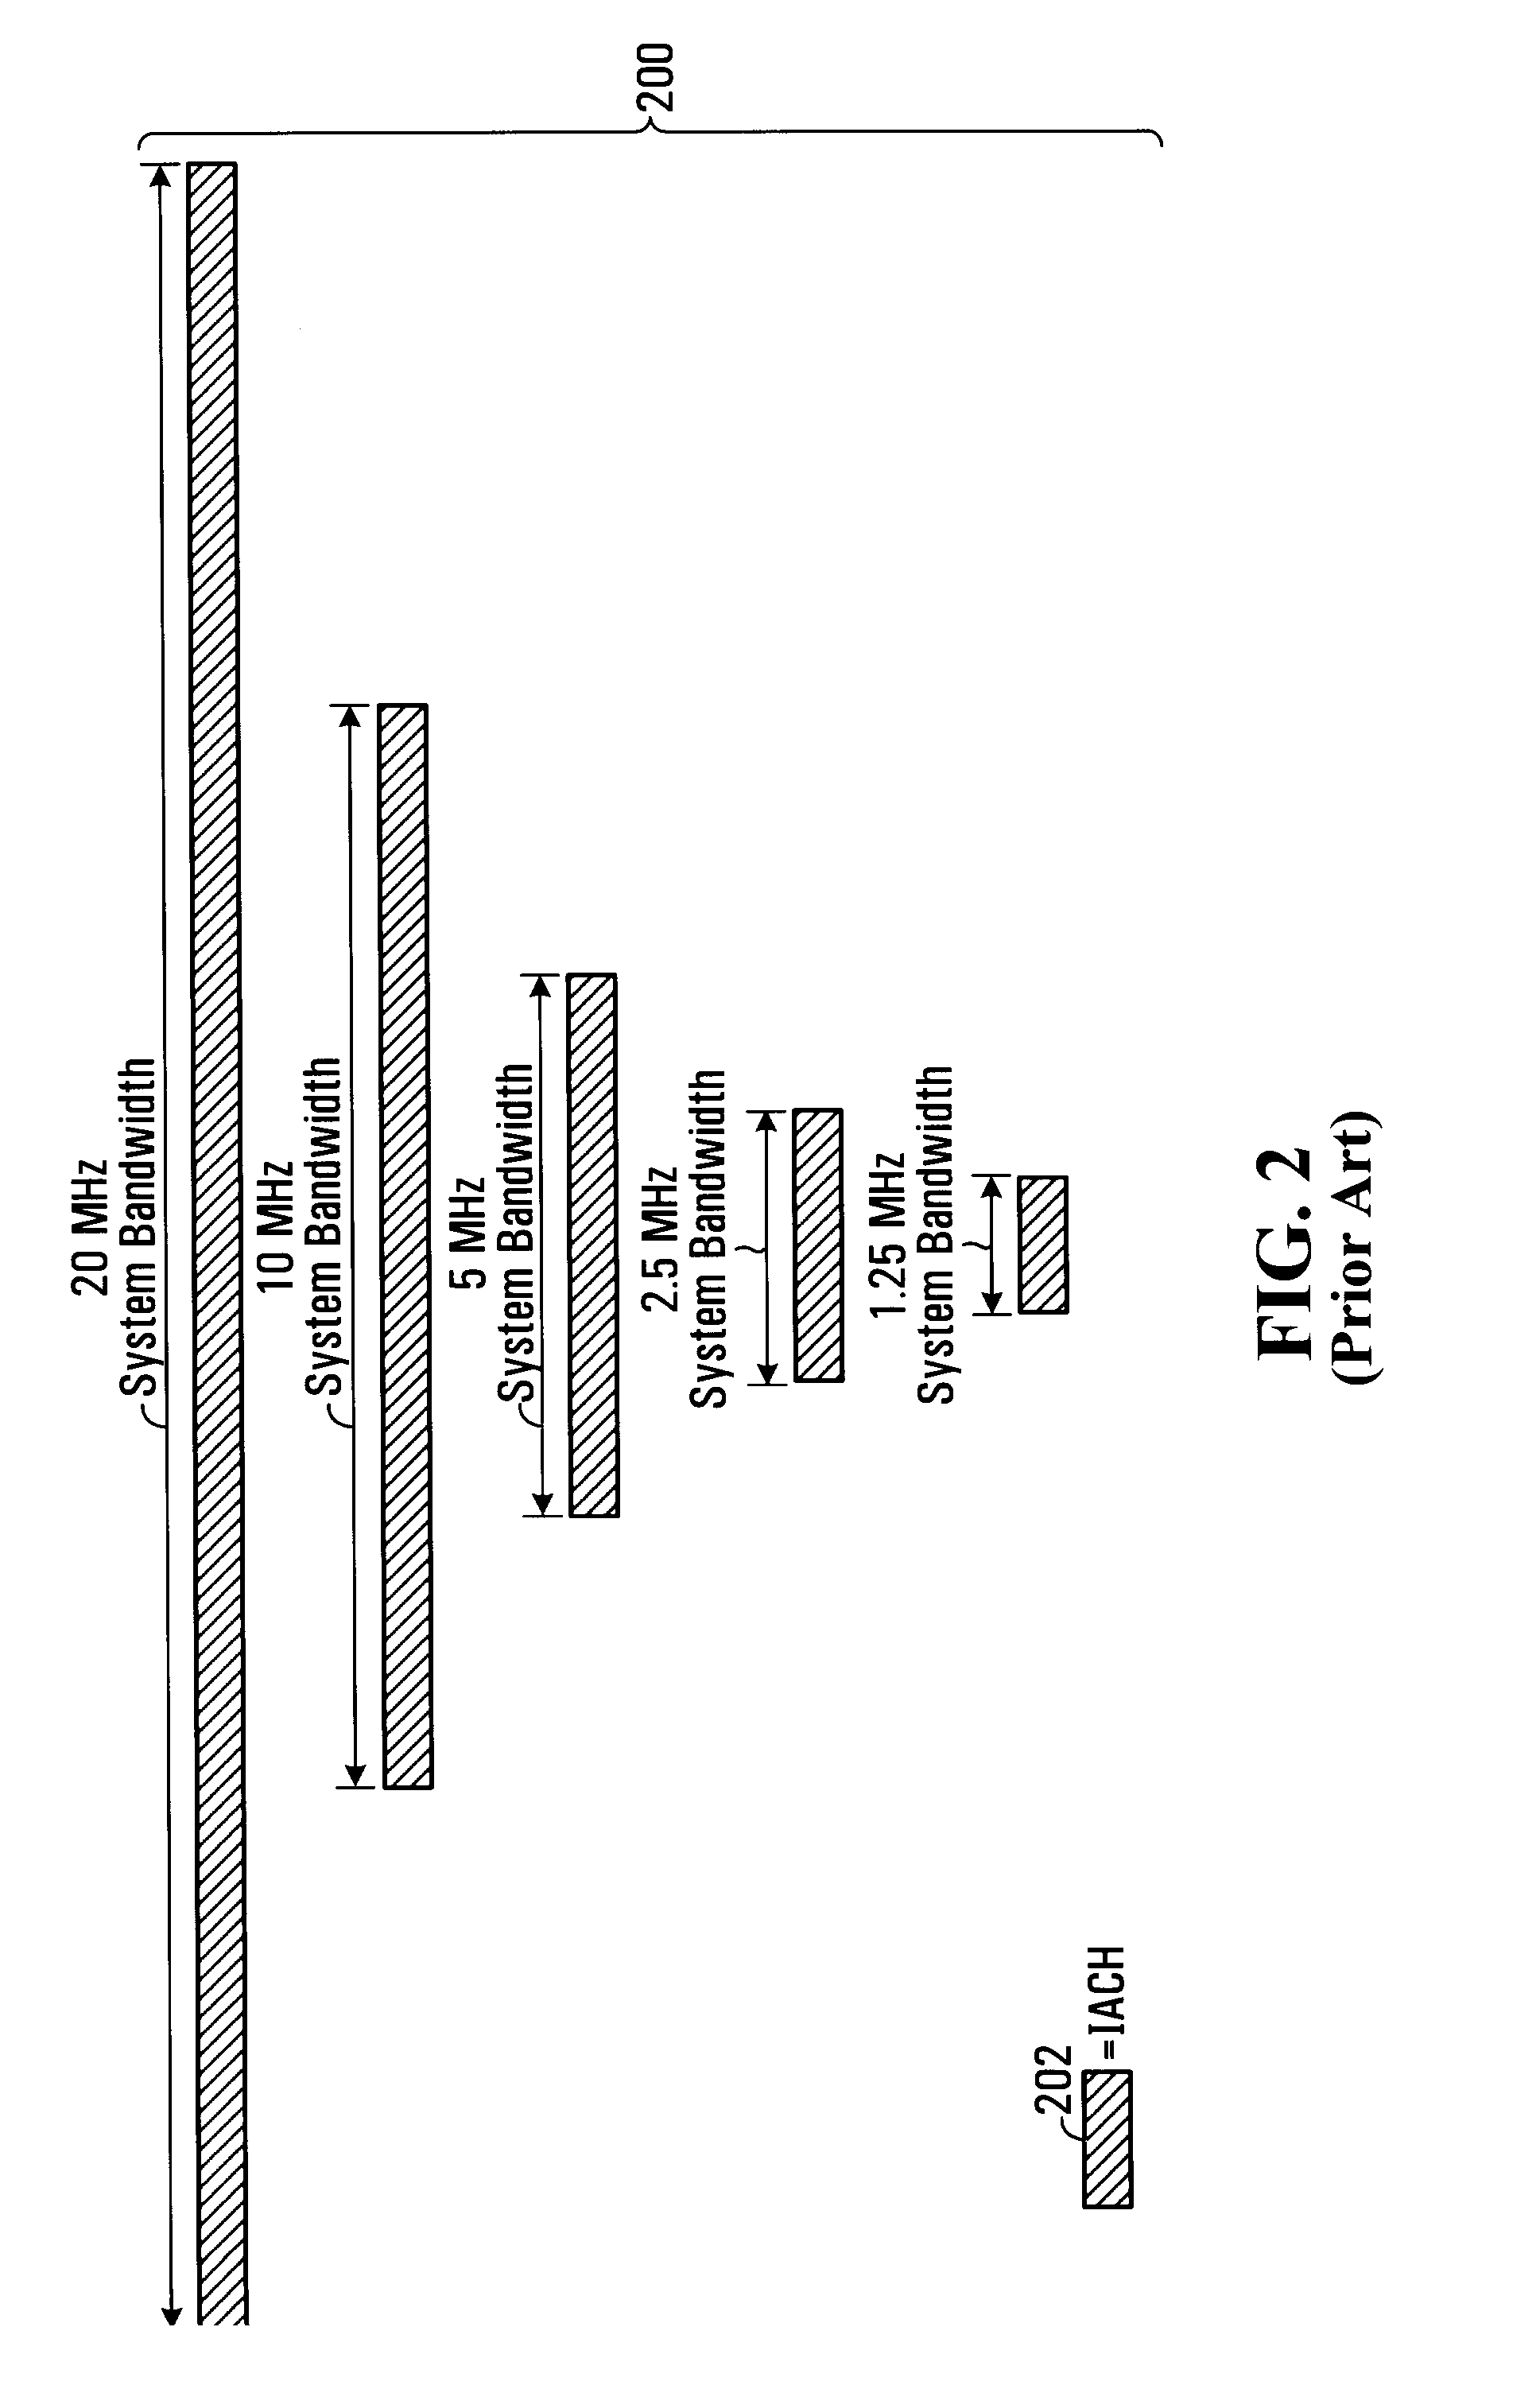 Initial Access Channel for Scalable Wireless Mobile Communication Networks